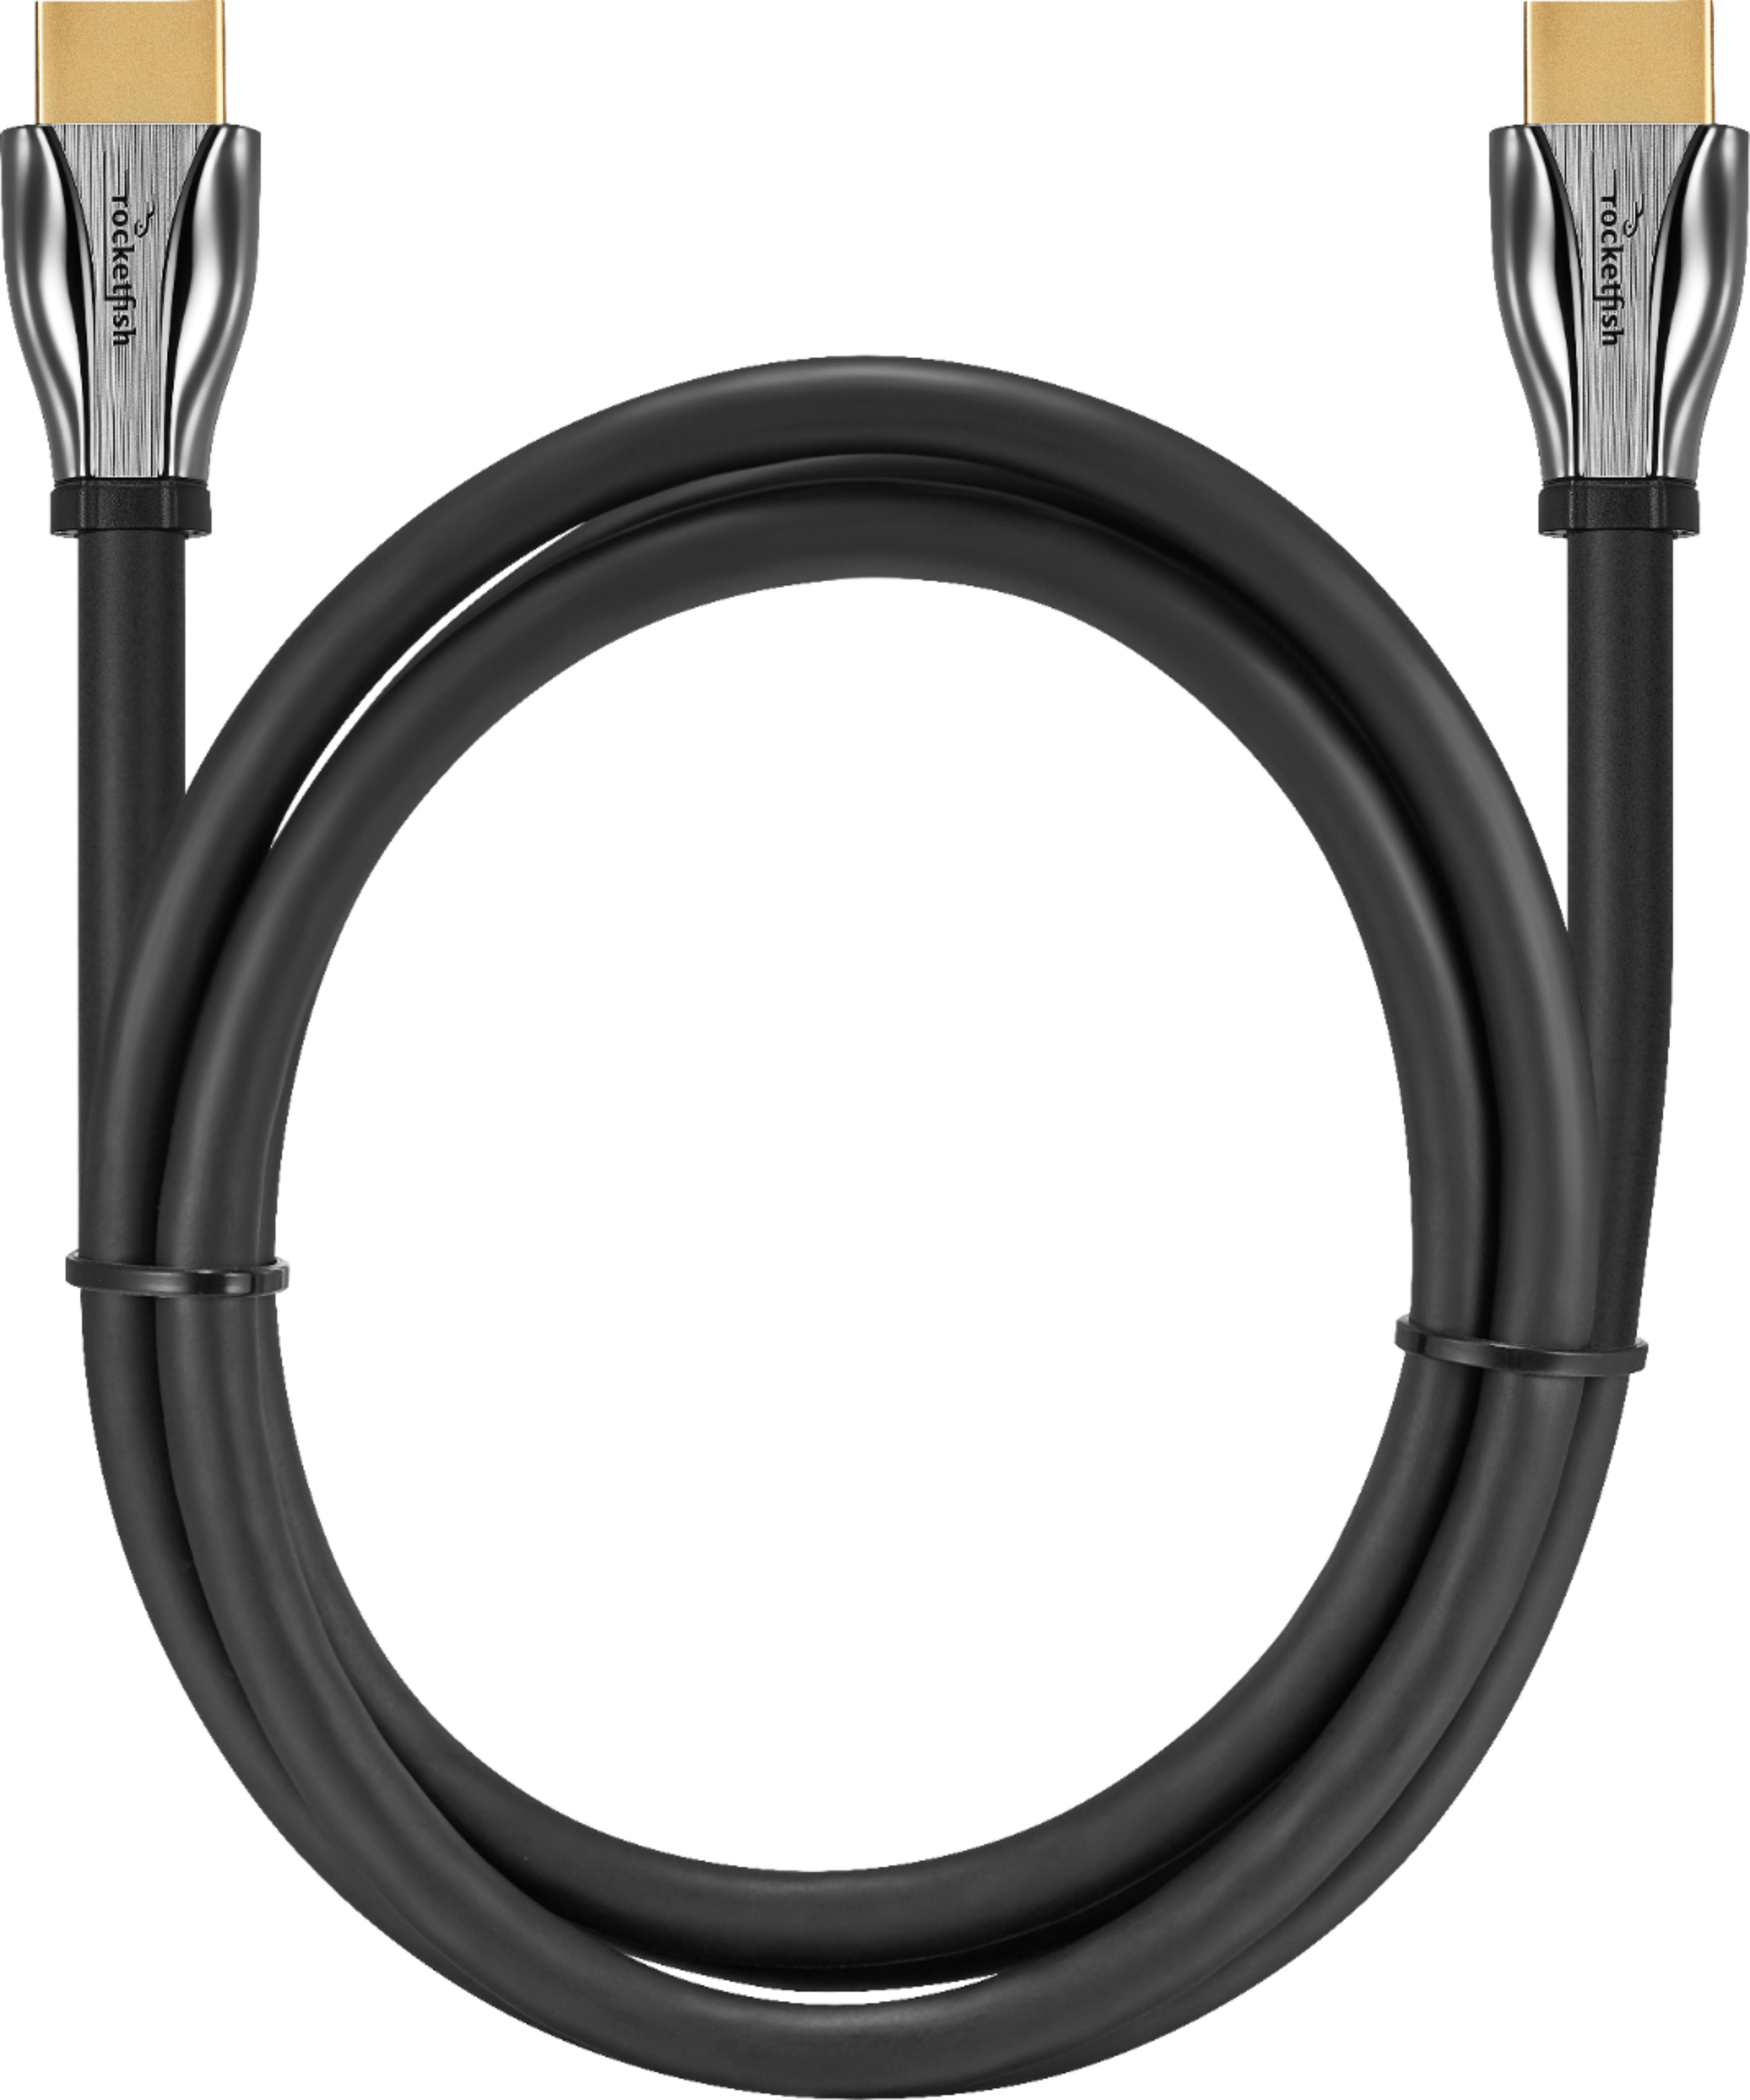 Rocketfish - 4' 8K Ultra High Speed HDMI Certified Cable - Black